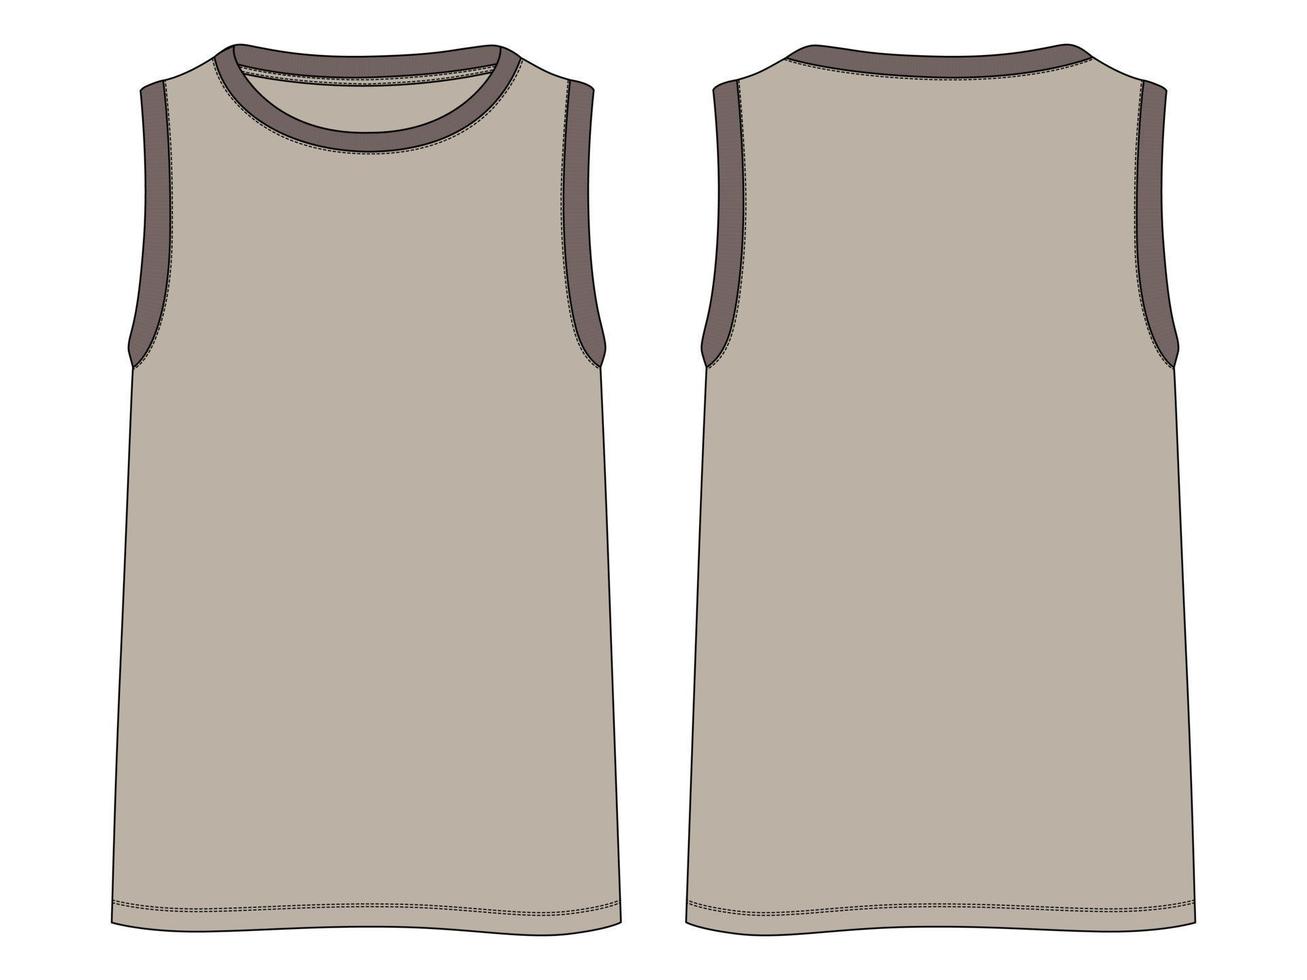 Tank Tops Technical Fashion flat sketch vector illustration template Front and back views. Apparel tank tops mock up for men's and boys.